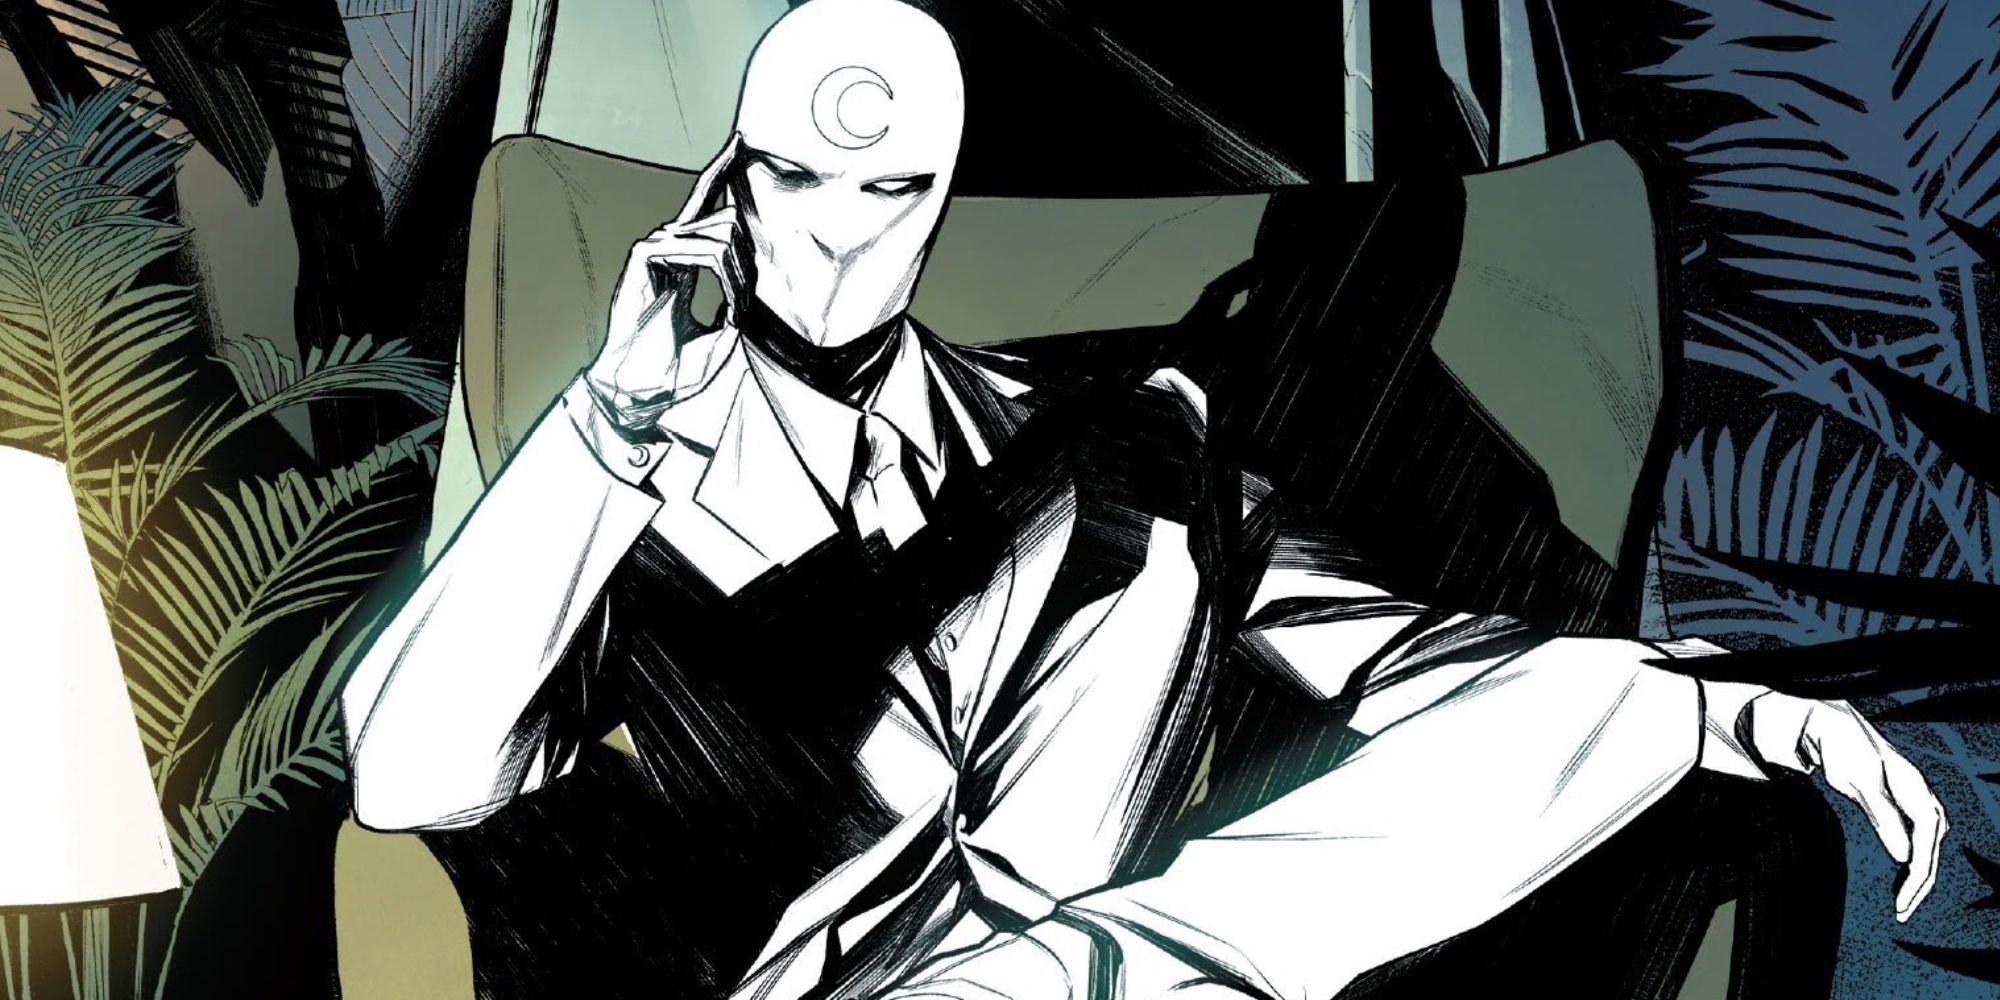 Mr. Knight sits in a chair in the Moon Knight comics.